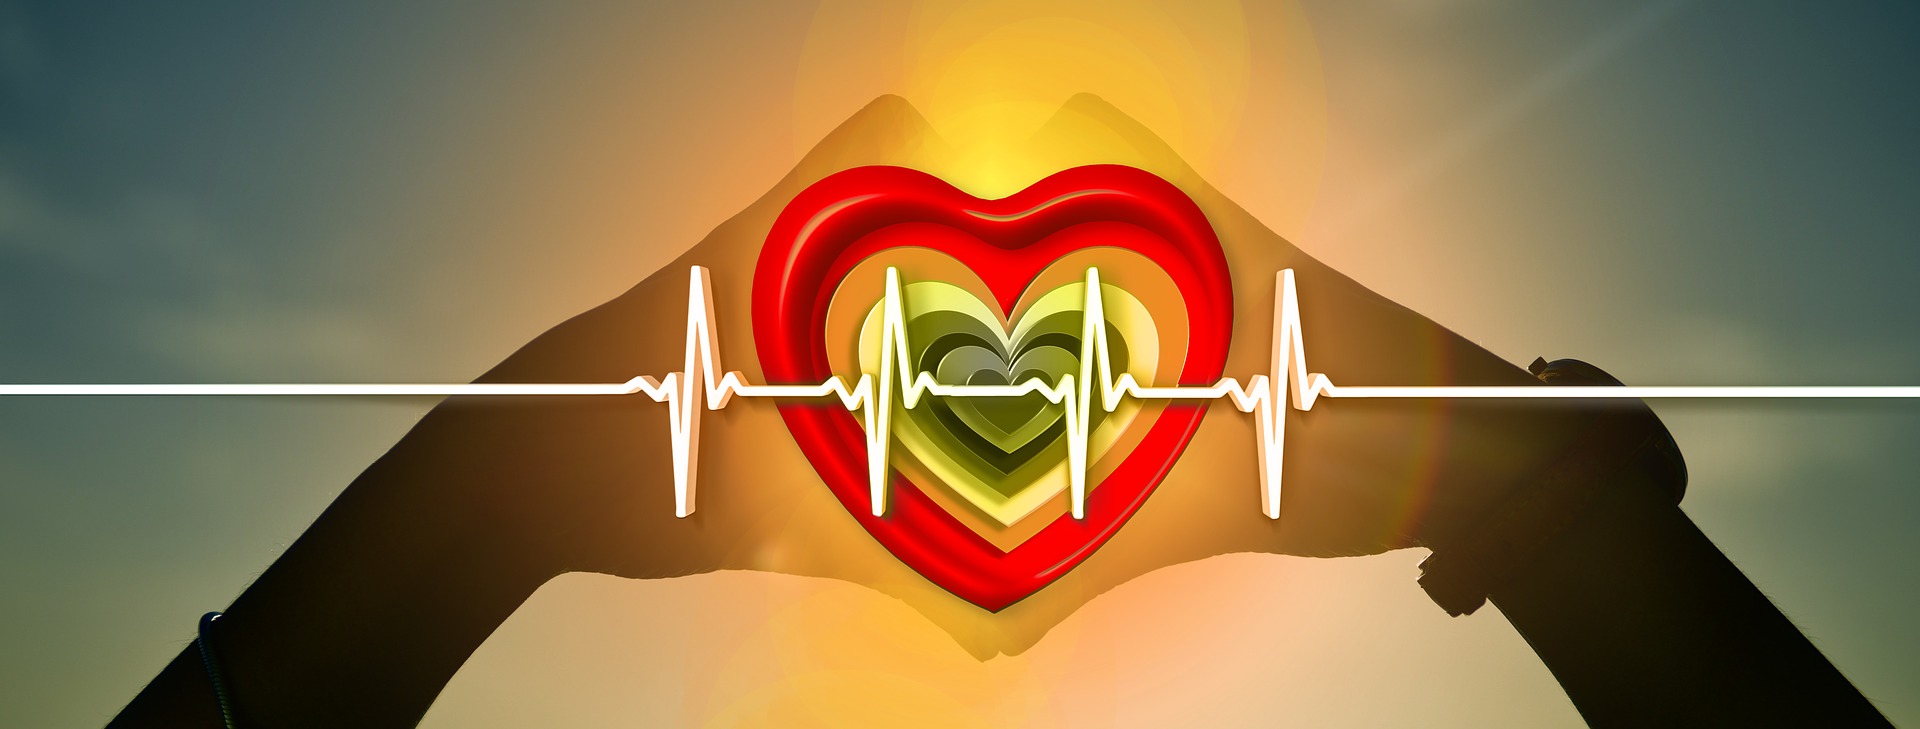 AMA offers 6 tips to improve heart health during American Heart Month